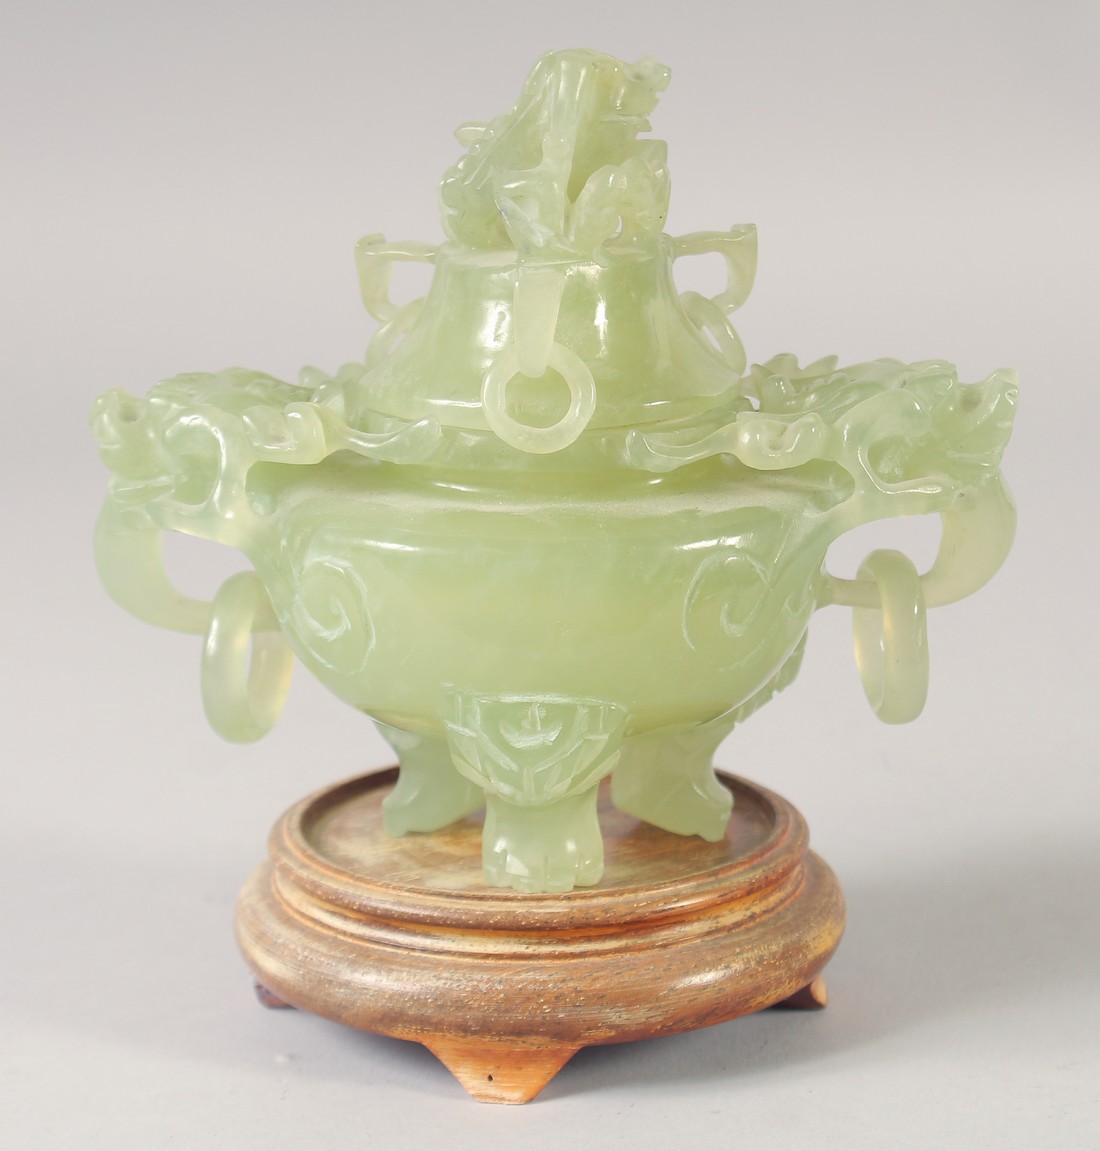 A CARVED JADE KORO AND COVER, with drop ring handles, together with hardwood stand.